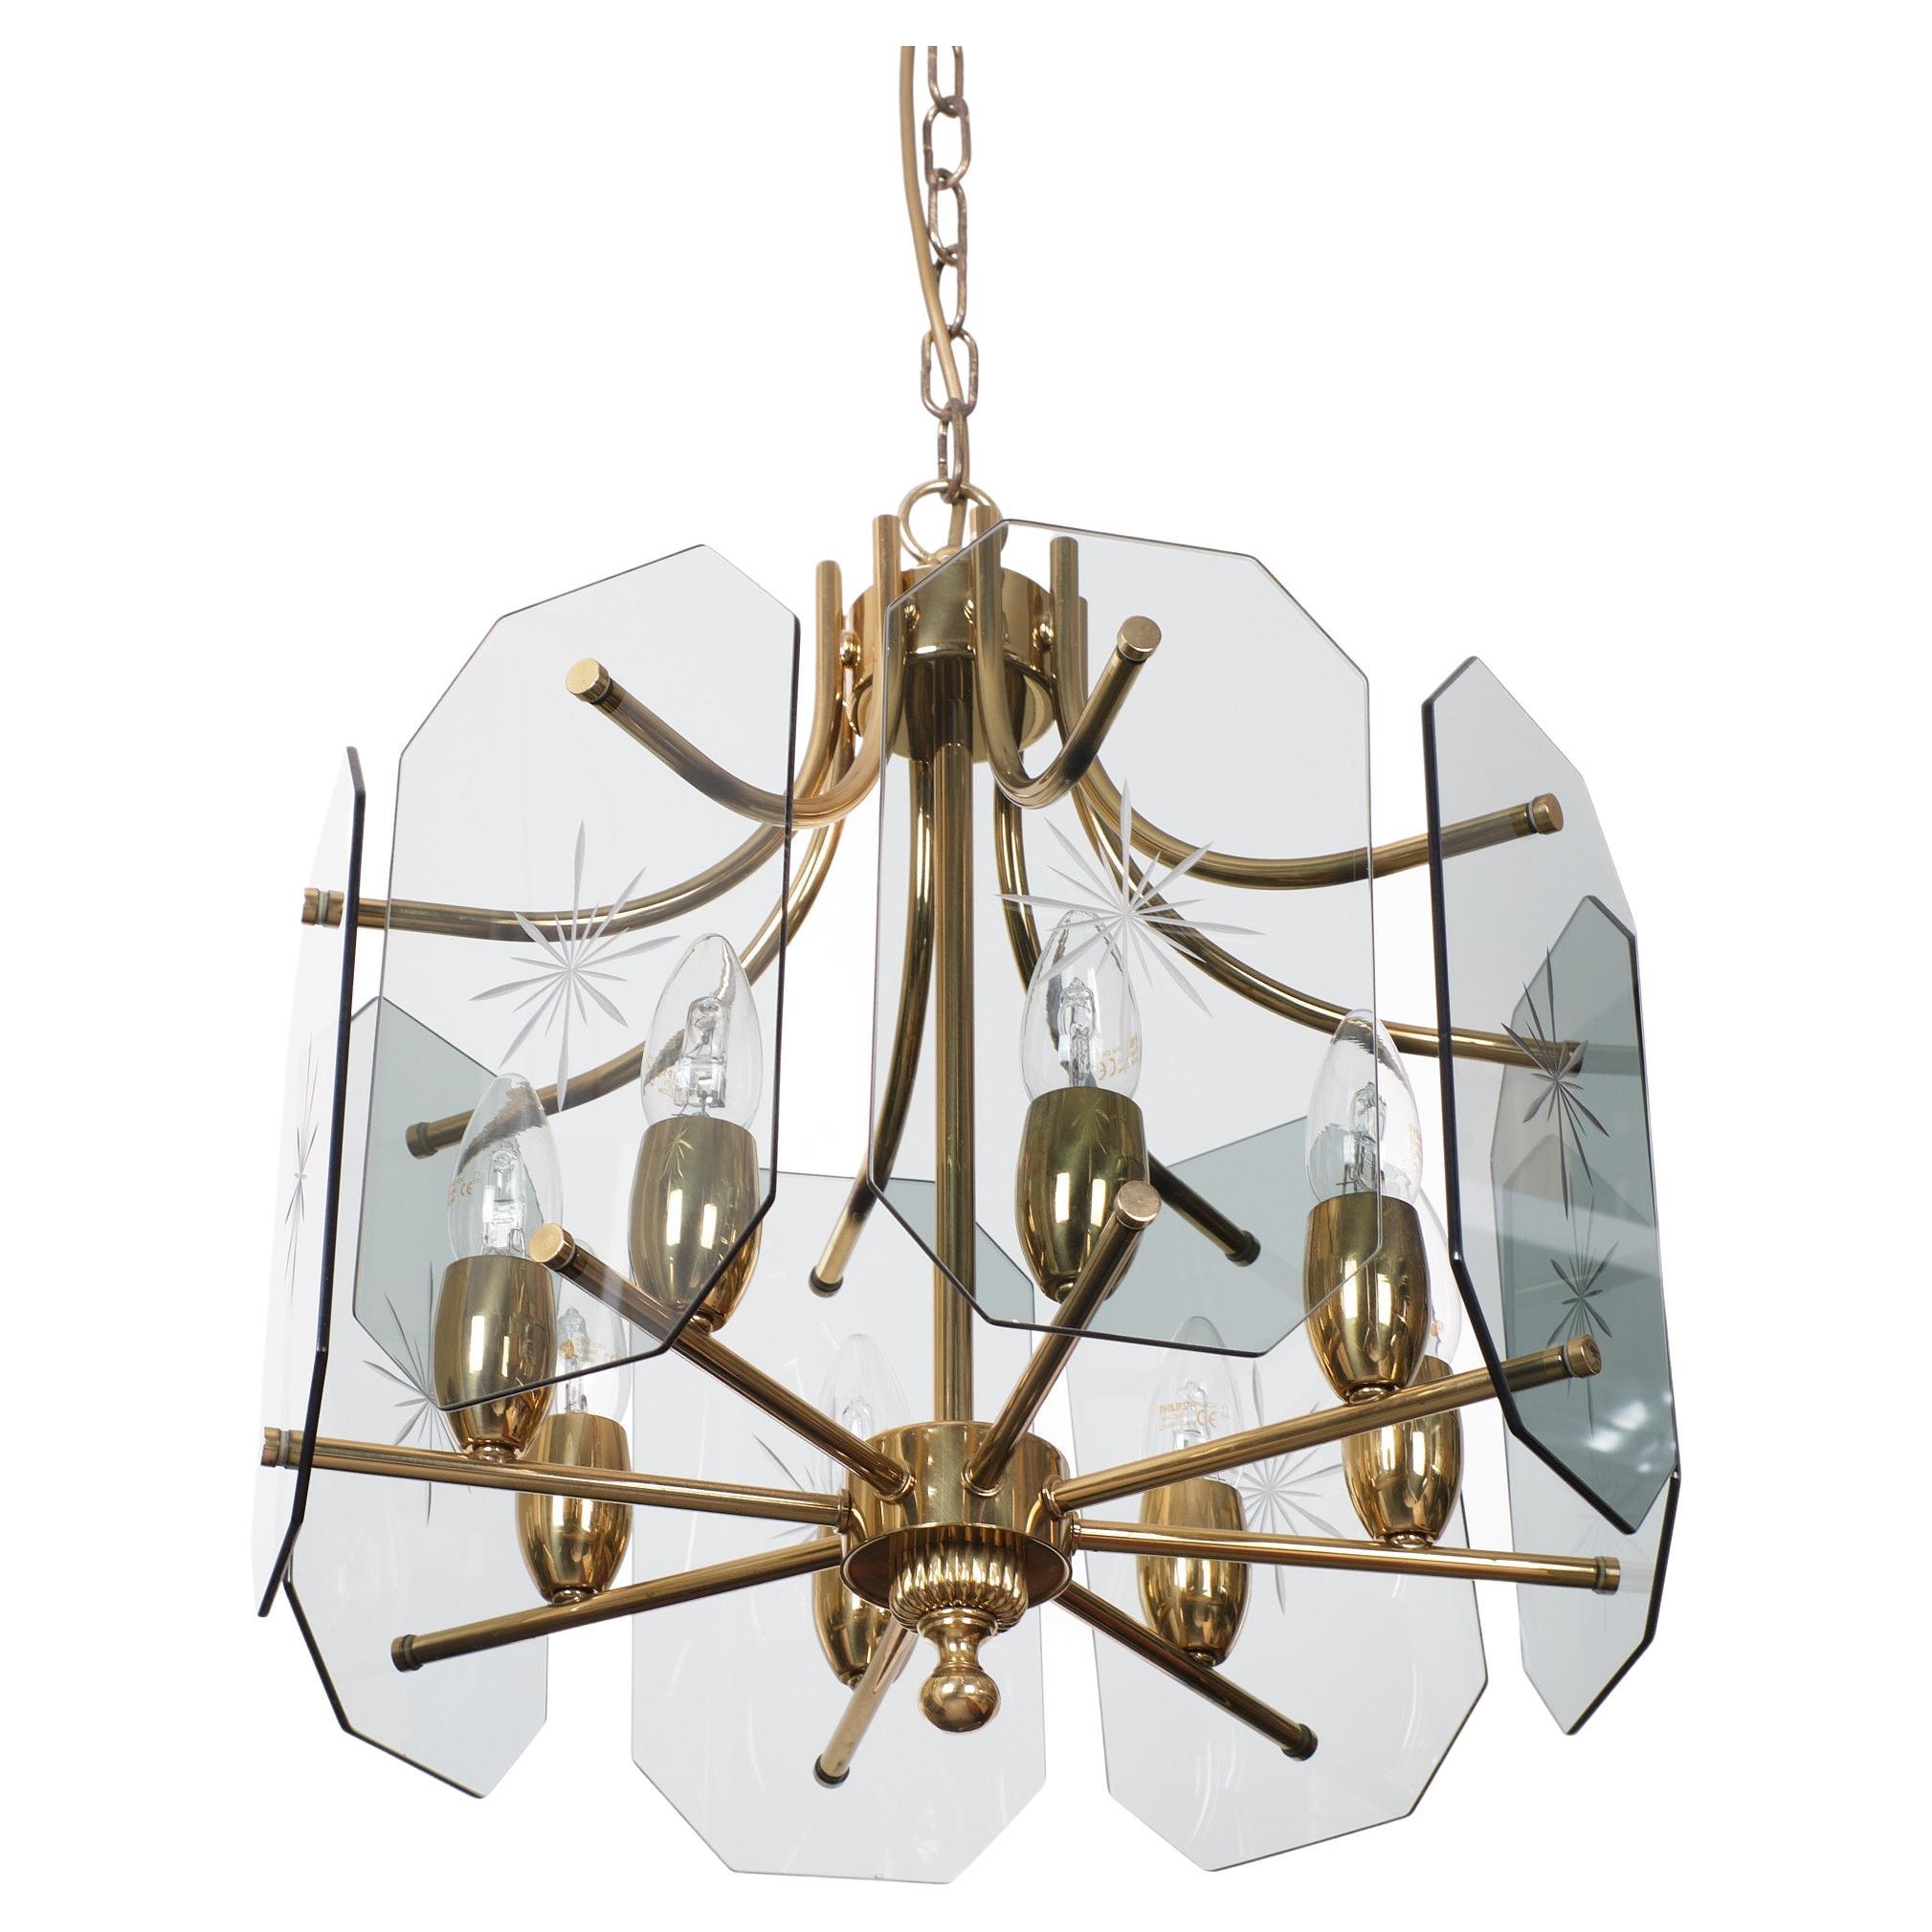 Beautiful chandelier. Brass and cut Glass plates. Design by Josef Brumberg Beleuchtungskörperfabrik 1970s Germany. Sundern. Hollywood Regency style. 
8 small socket bulbs needed. Very good condition.